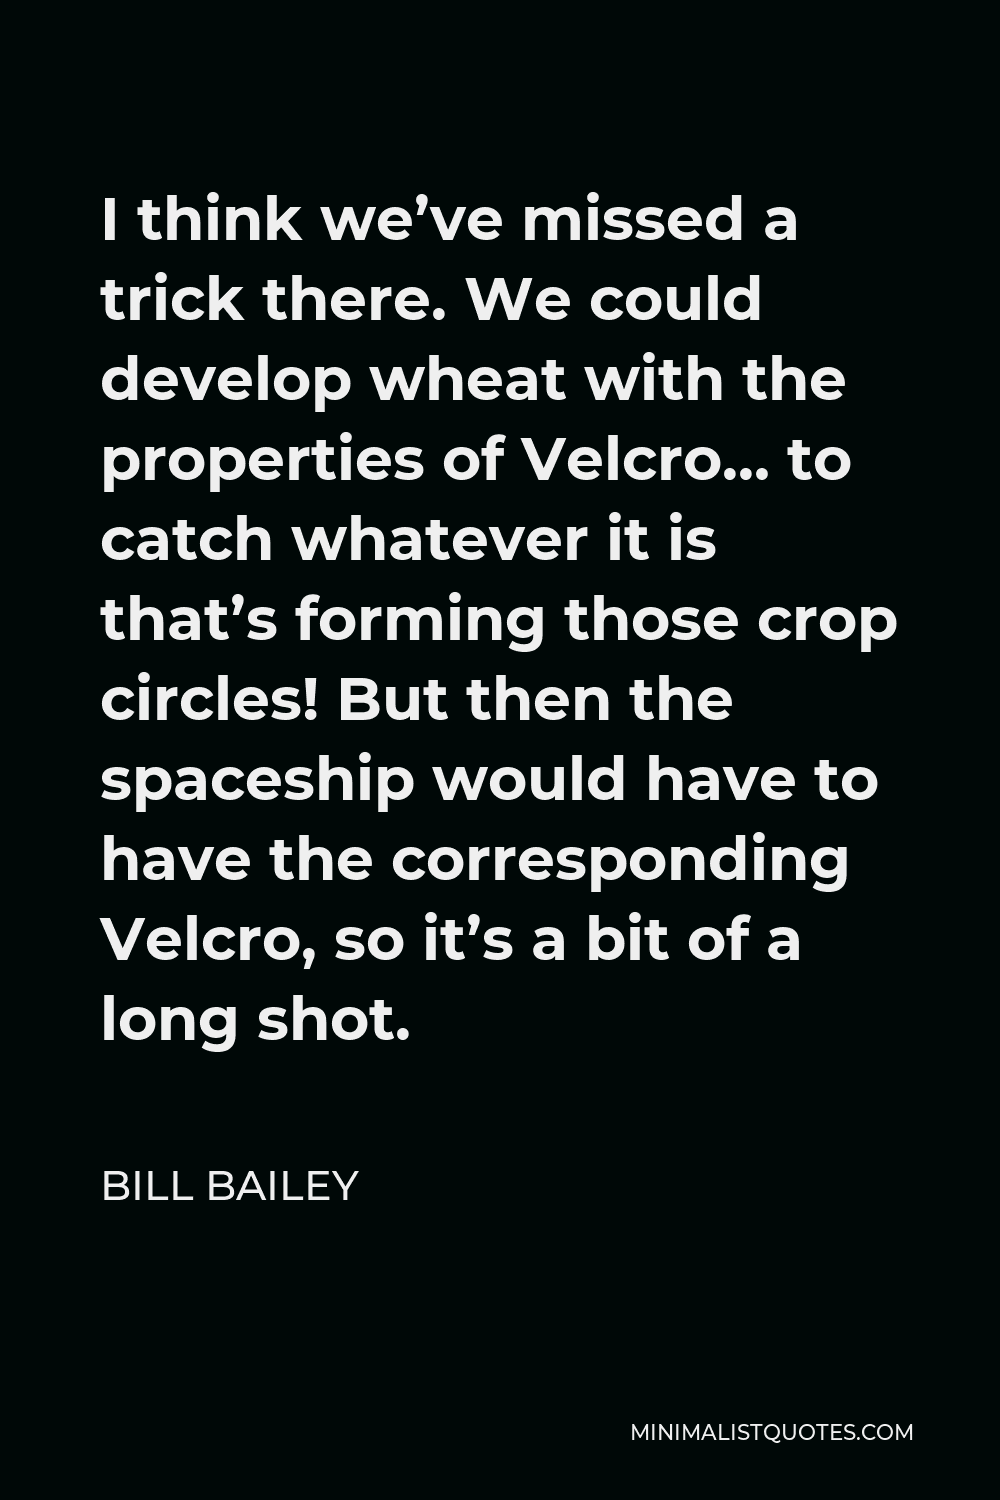 Bill Bailey Quote - I think we’ve missed a trick there. We could develop wheat with the properties of Velcro… to catch whatever it is that’s forming those crop circles! But then the spaceship would have to have the corresponding Velcro, so it’s a bit of a long shot.